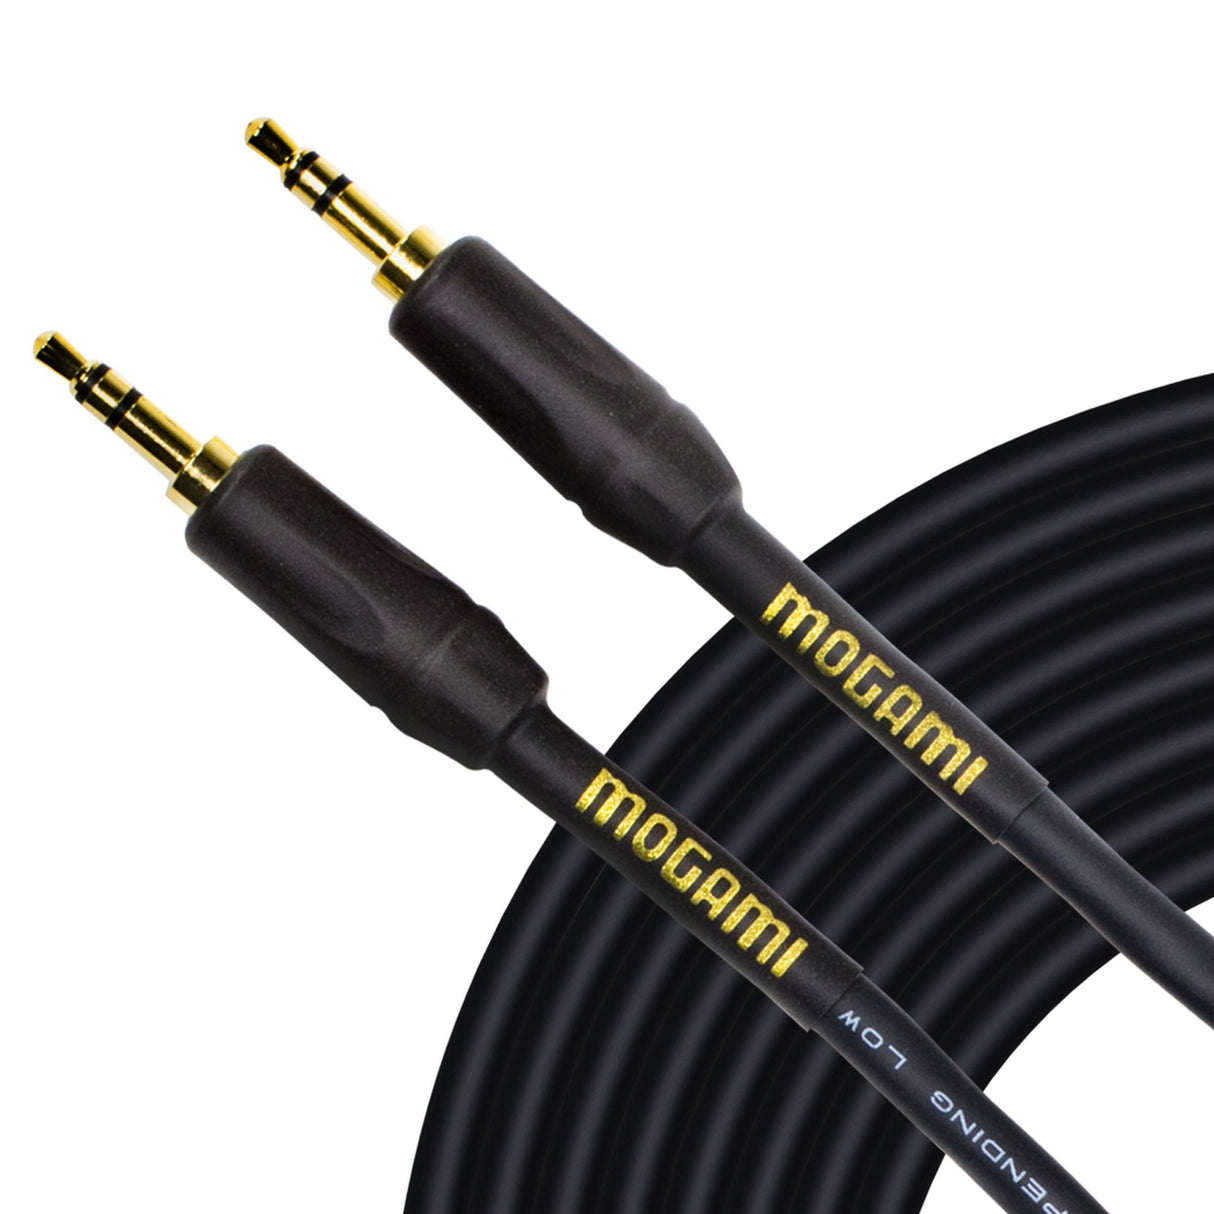 Mogami GOLD 3.5 3.5 20 3.5mm TRS to 3.5 TRS Stereo Cable, 20-Feet